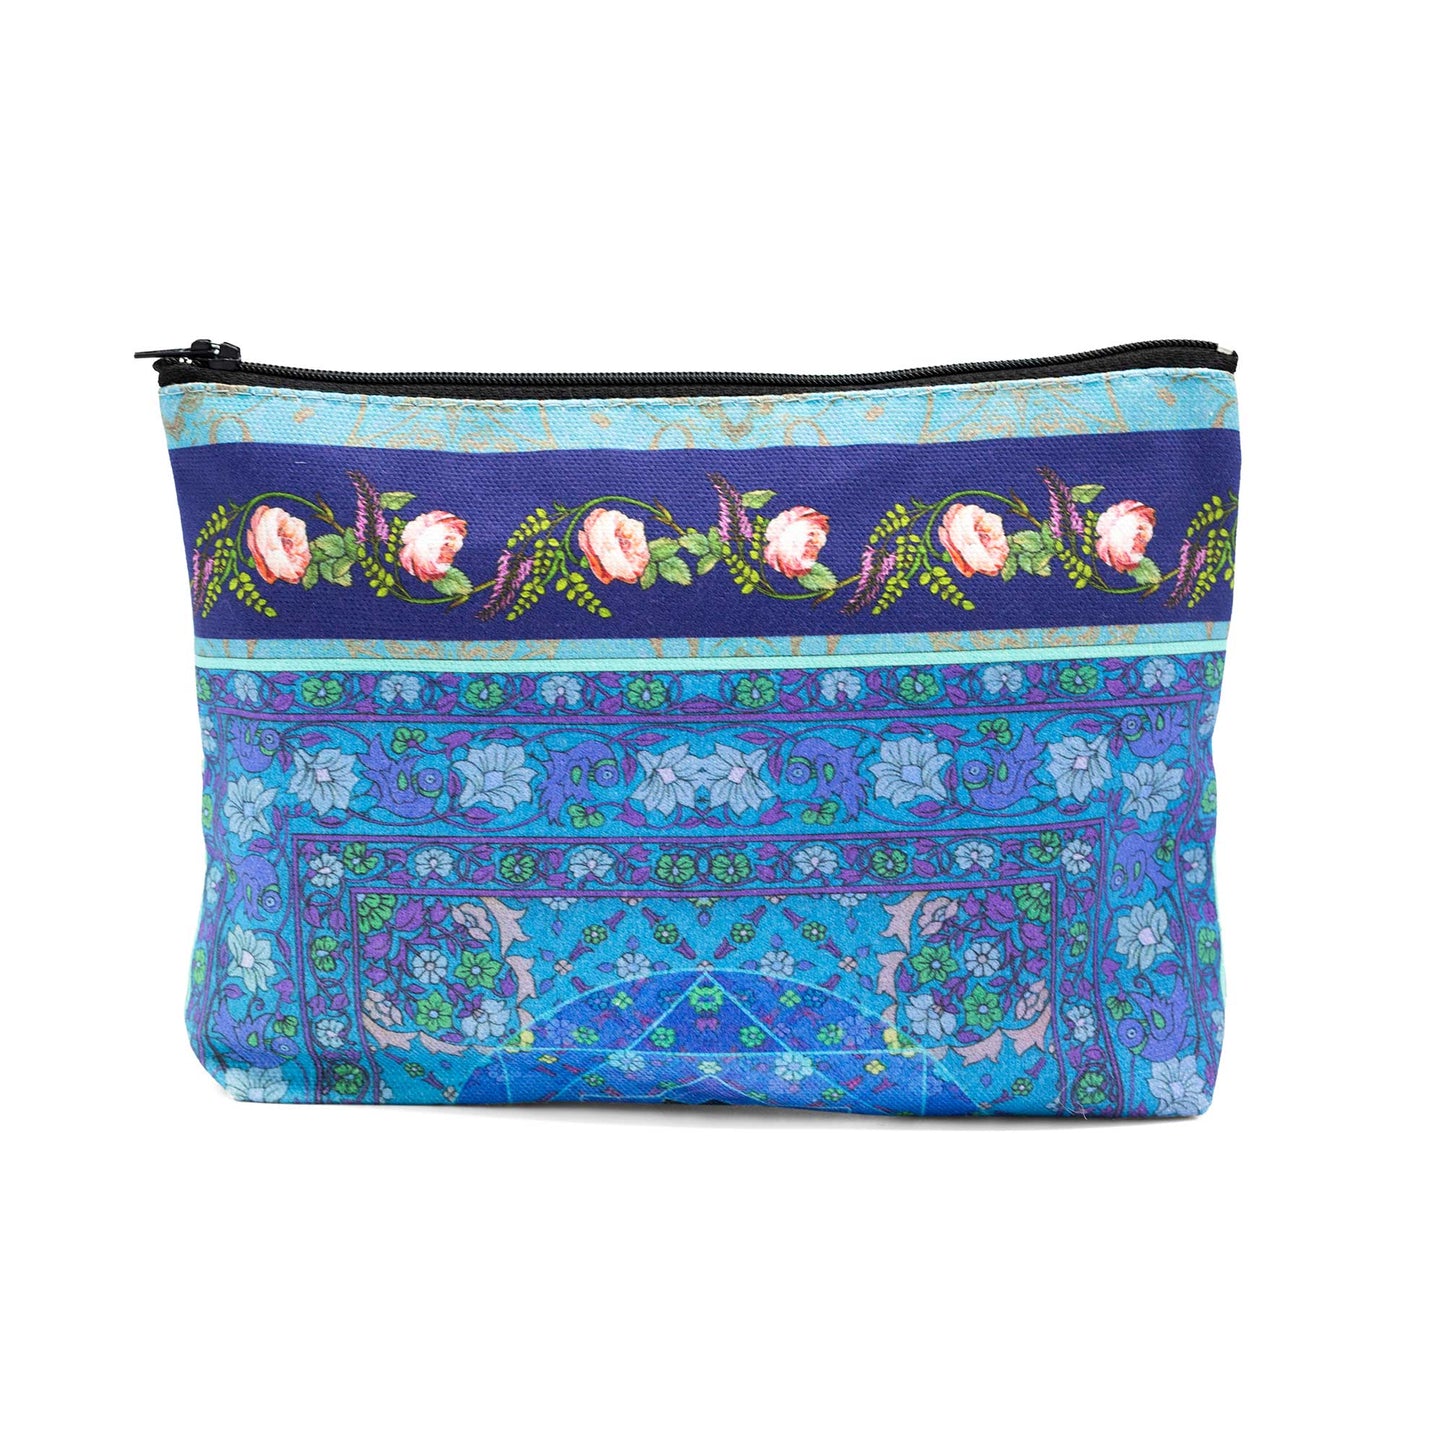 Cosmetics bag featuring The Singh Twins Knowledge Design. Blue and green pattern with a floral border.